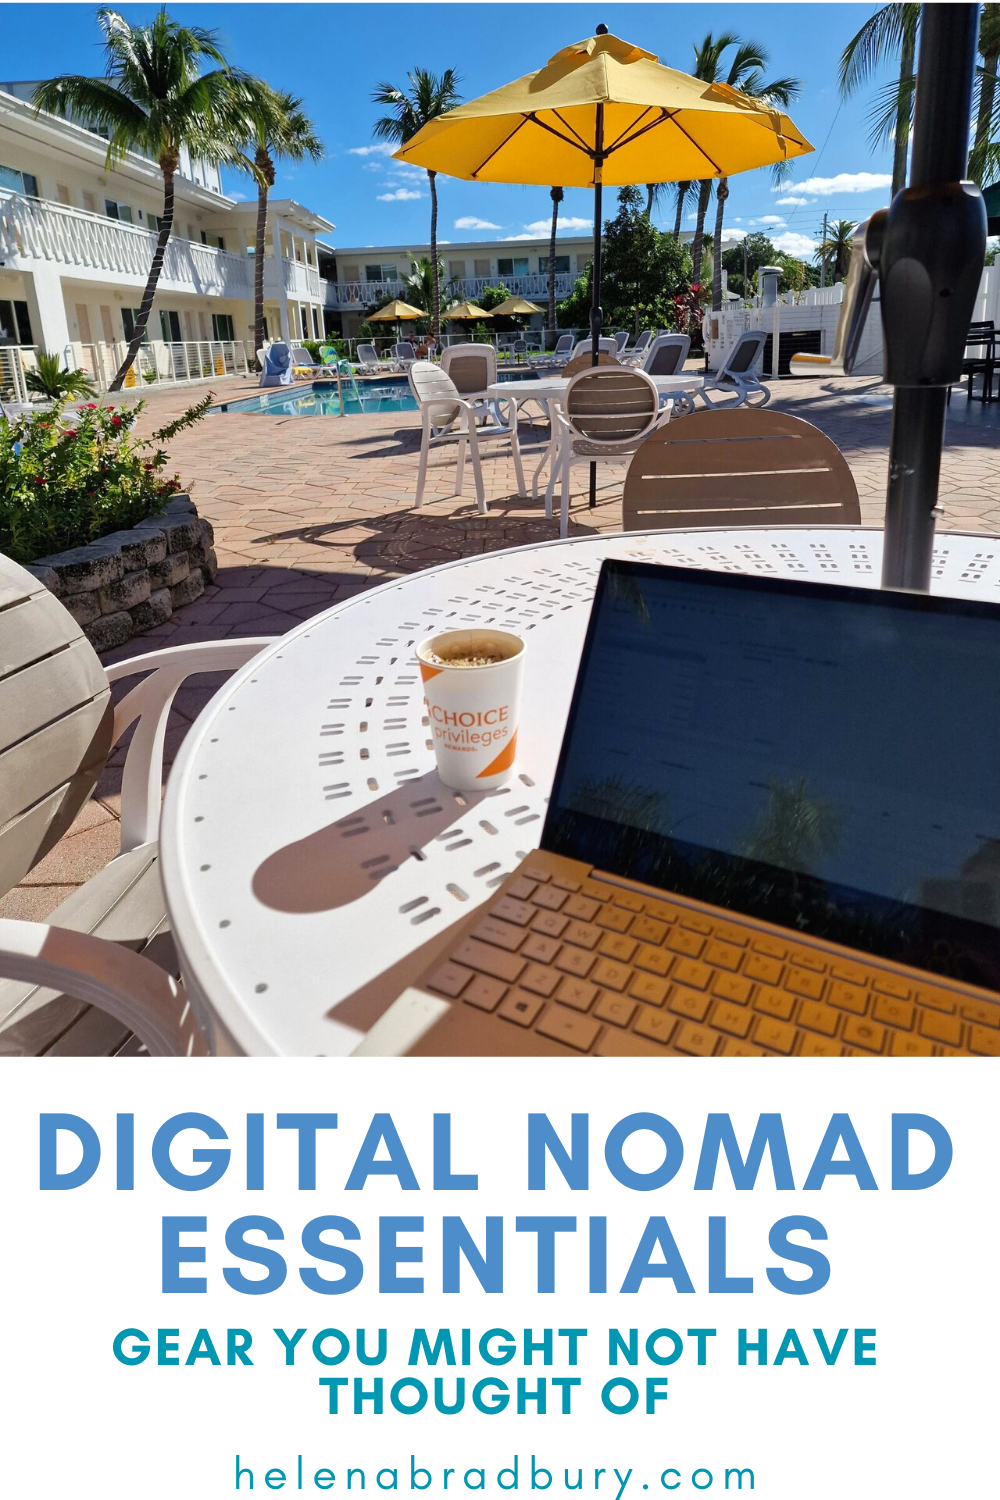 You’ve got your laptop and passport, but have you got everything else you need for being a digital nomad? Here are 12 digital nomad essentials you might not have thought of. | digital nomad essentials list | nomad insurance | digital nomad insurance